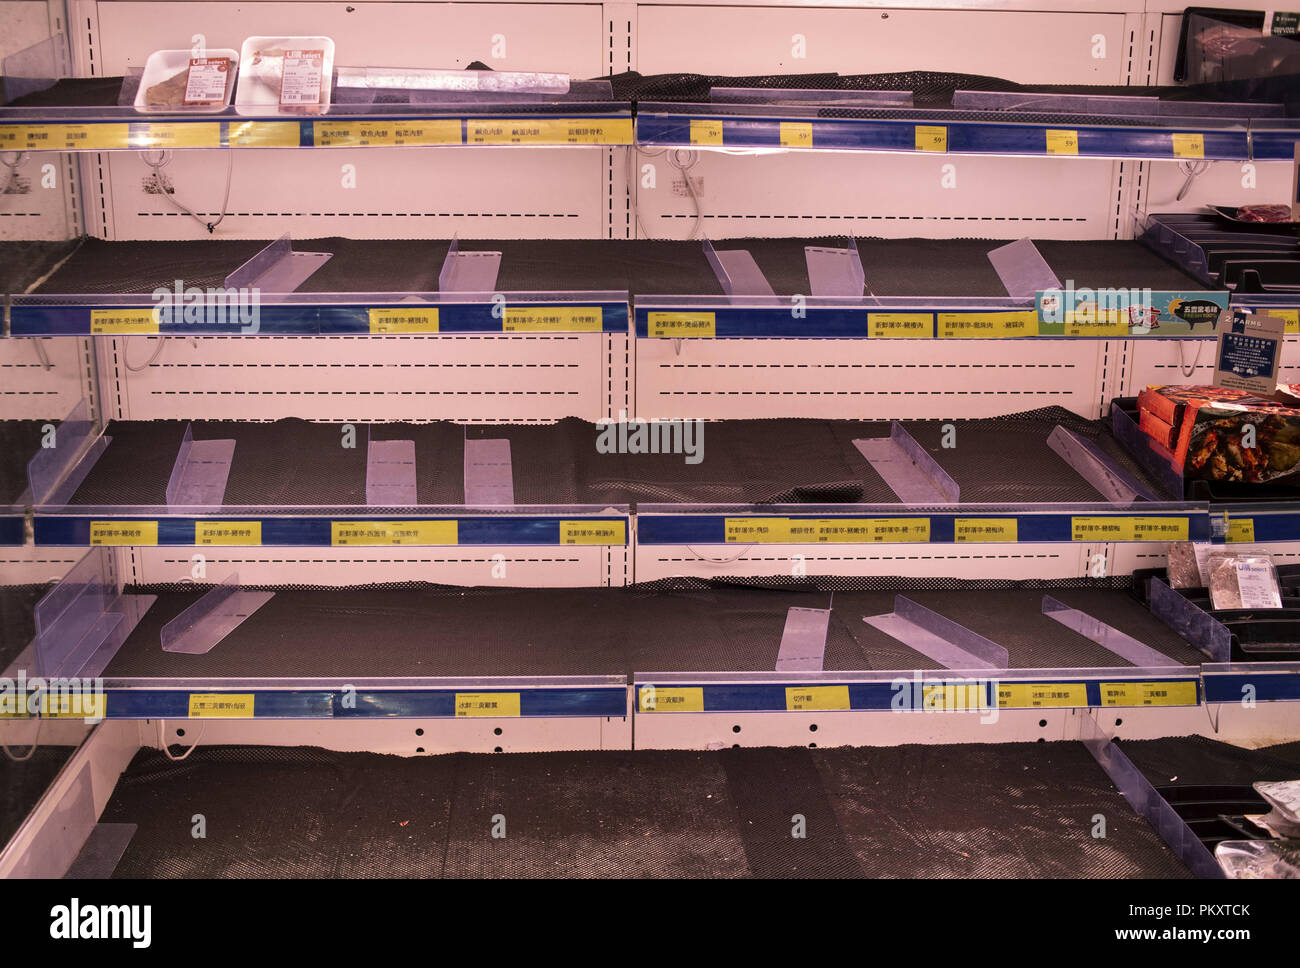 Hong Kong, Kowloon, Hong Kong. 15th Sep, 2018. Empty Supermarket meat shelves as residents stock up ahead of Super Typhoon Mangkhut arrival in Hong Kong, China. It is expected to land with a typhoon signal No. 8. Credit: Miguel Candela/SOPA Images/ZUMA Wire/Alamy Live News Stock Photo